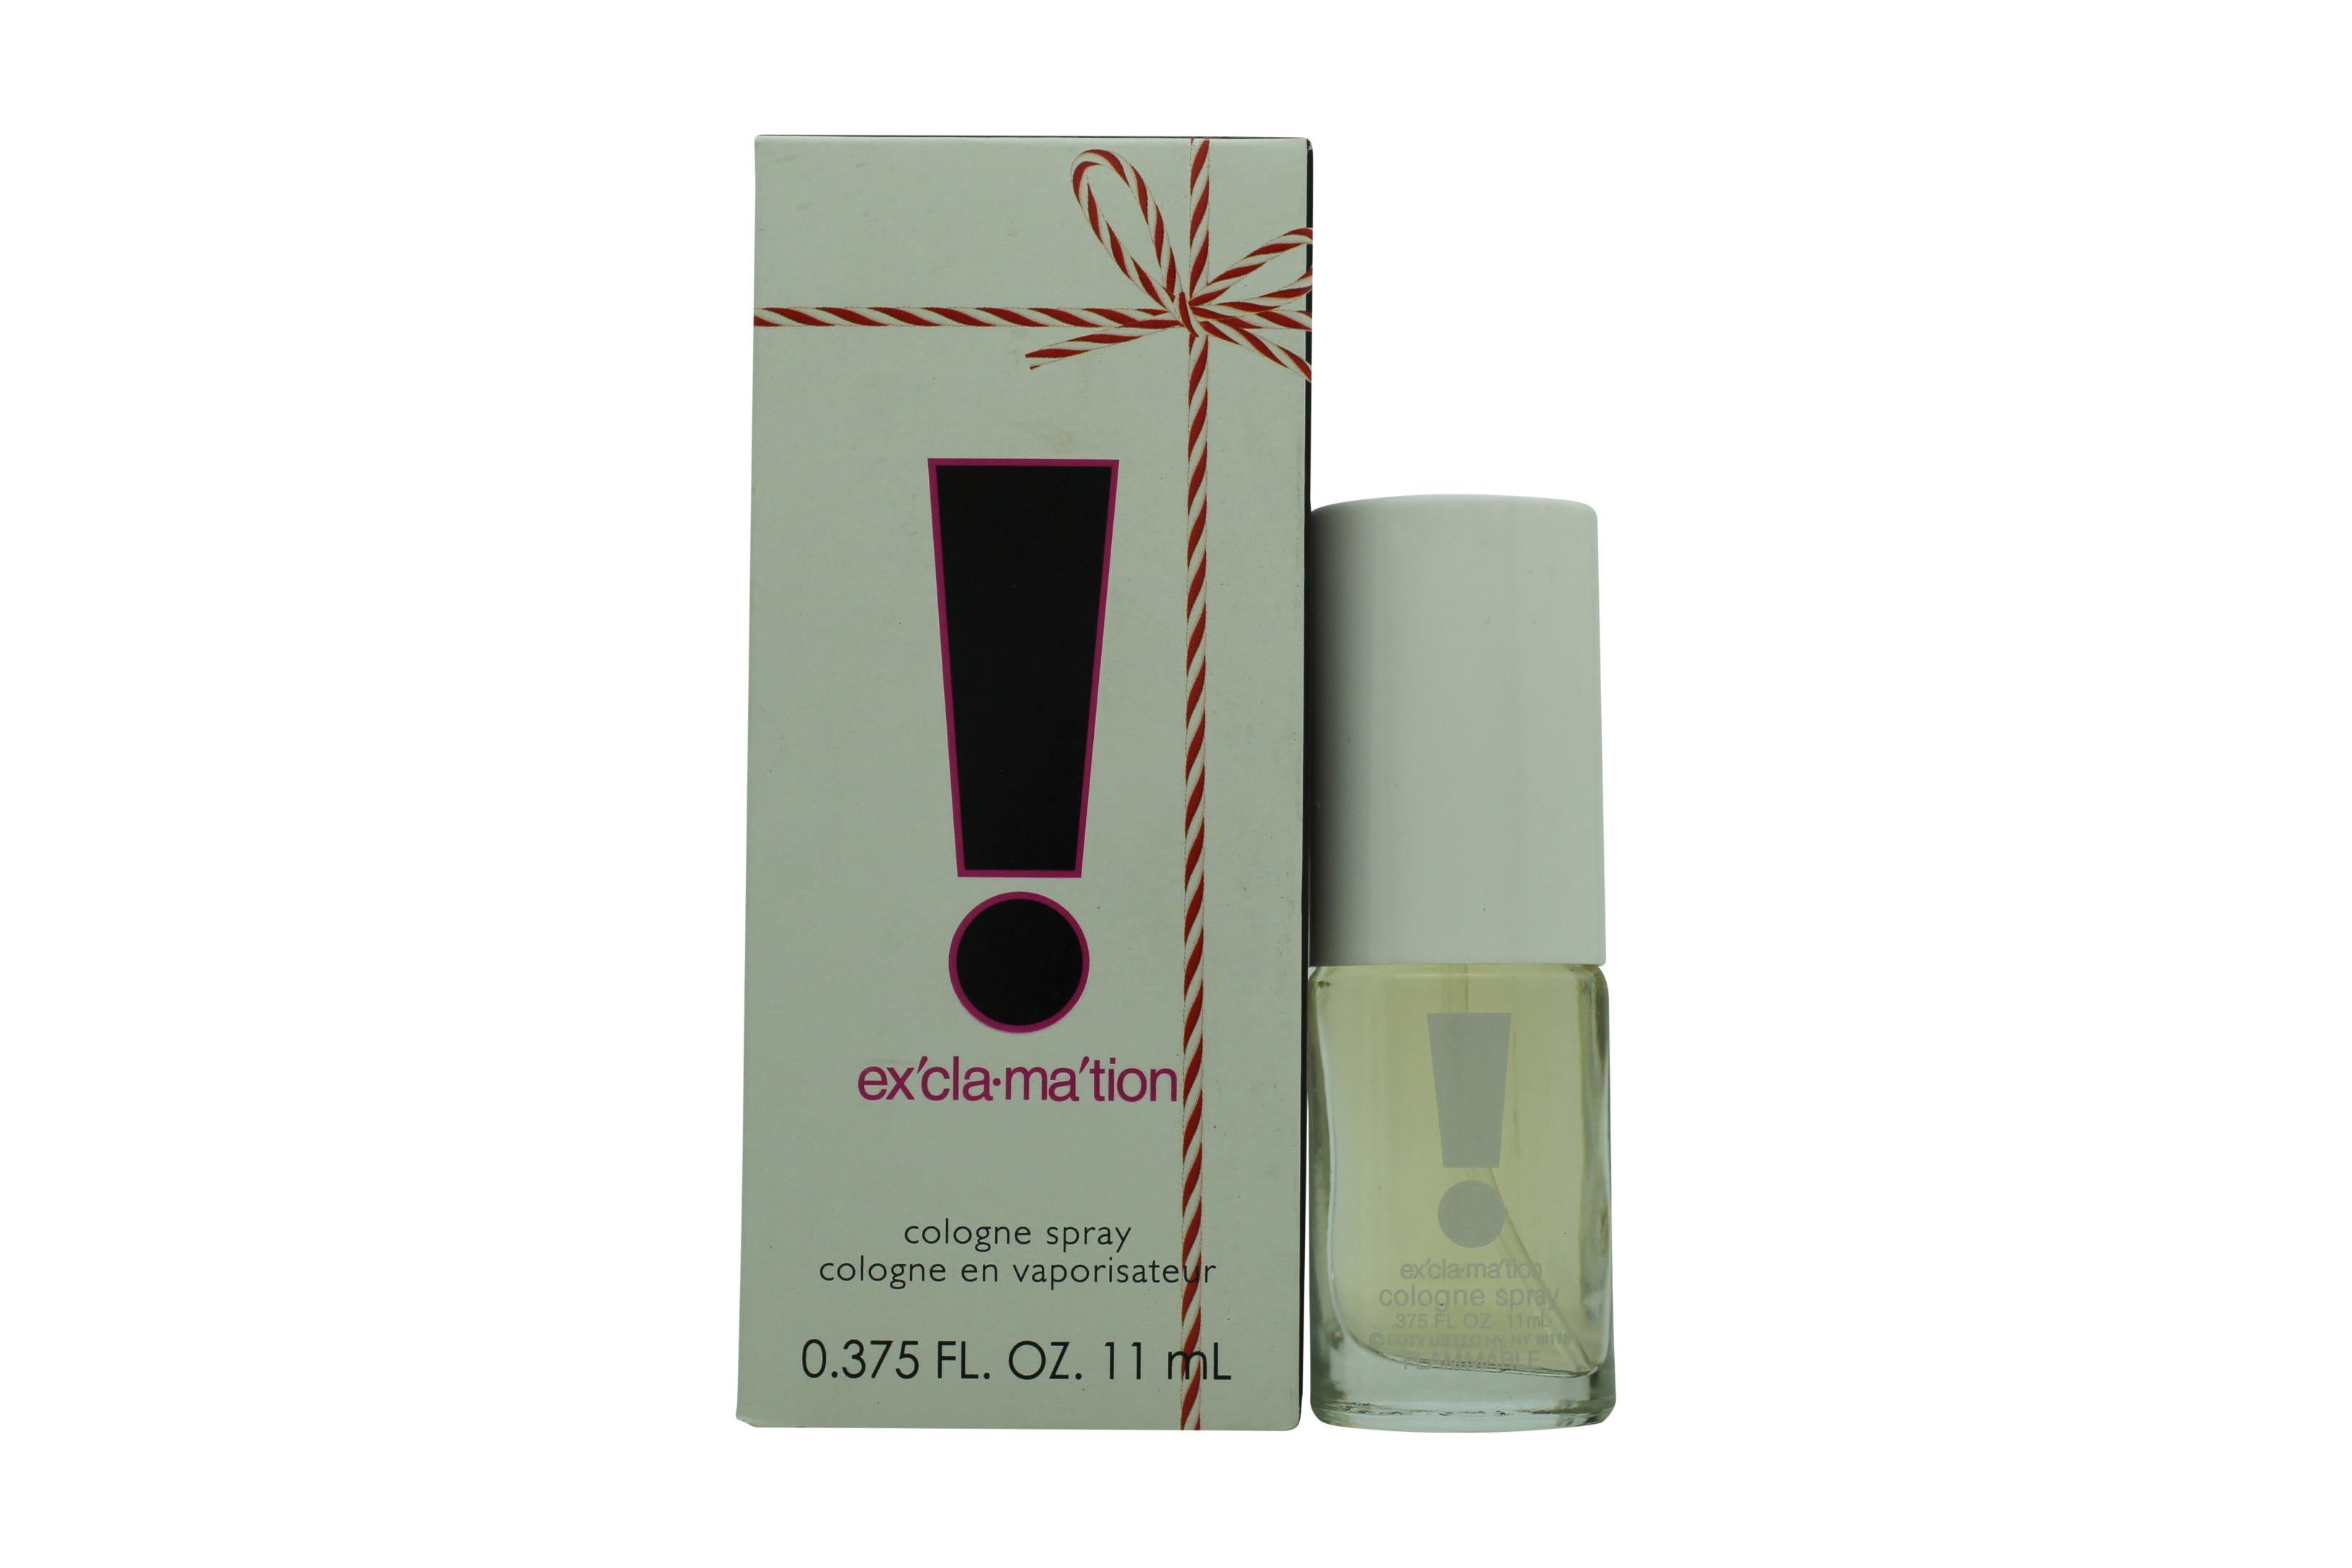 View Coty ExclaMation Eau De Cologne 11ml Spray information